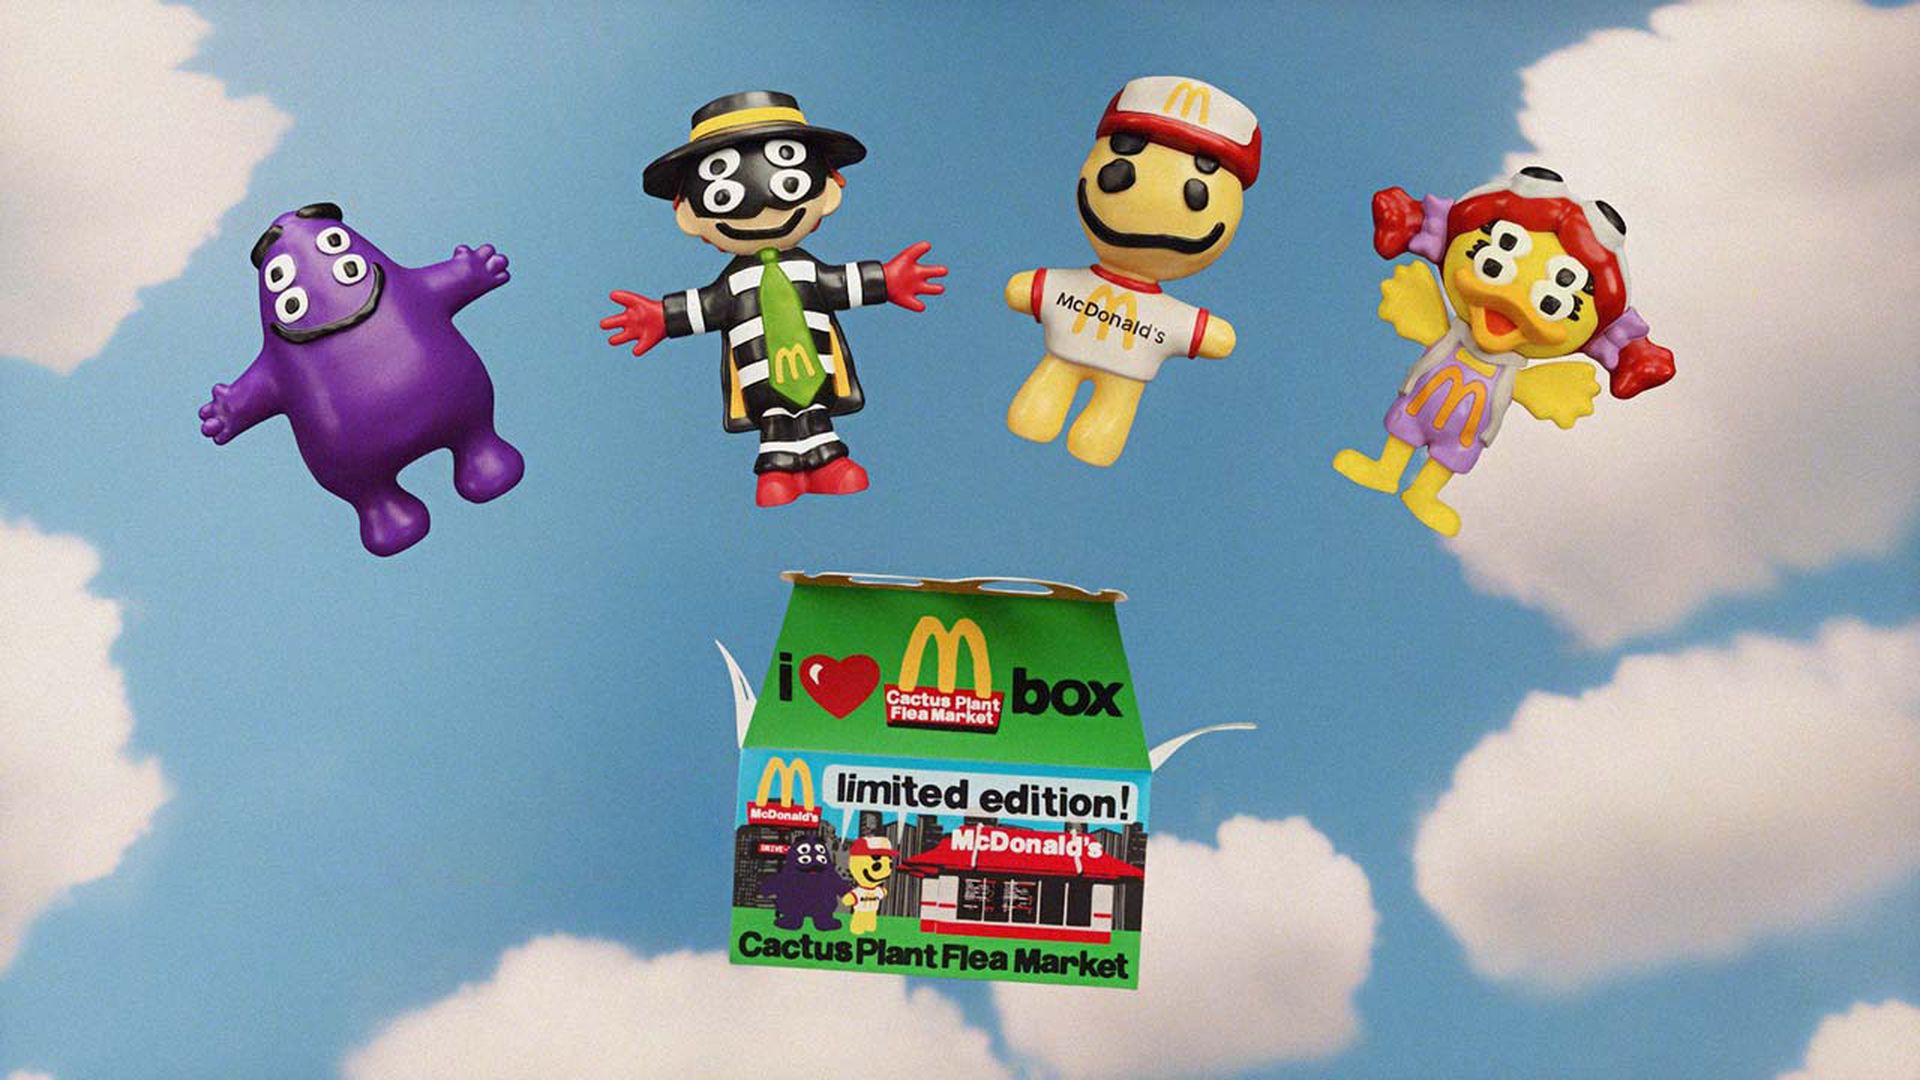 McDonald's adult Happy Meal with Cactus Plant Flea Market toys release today